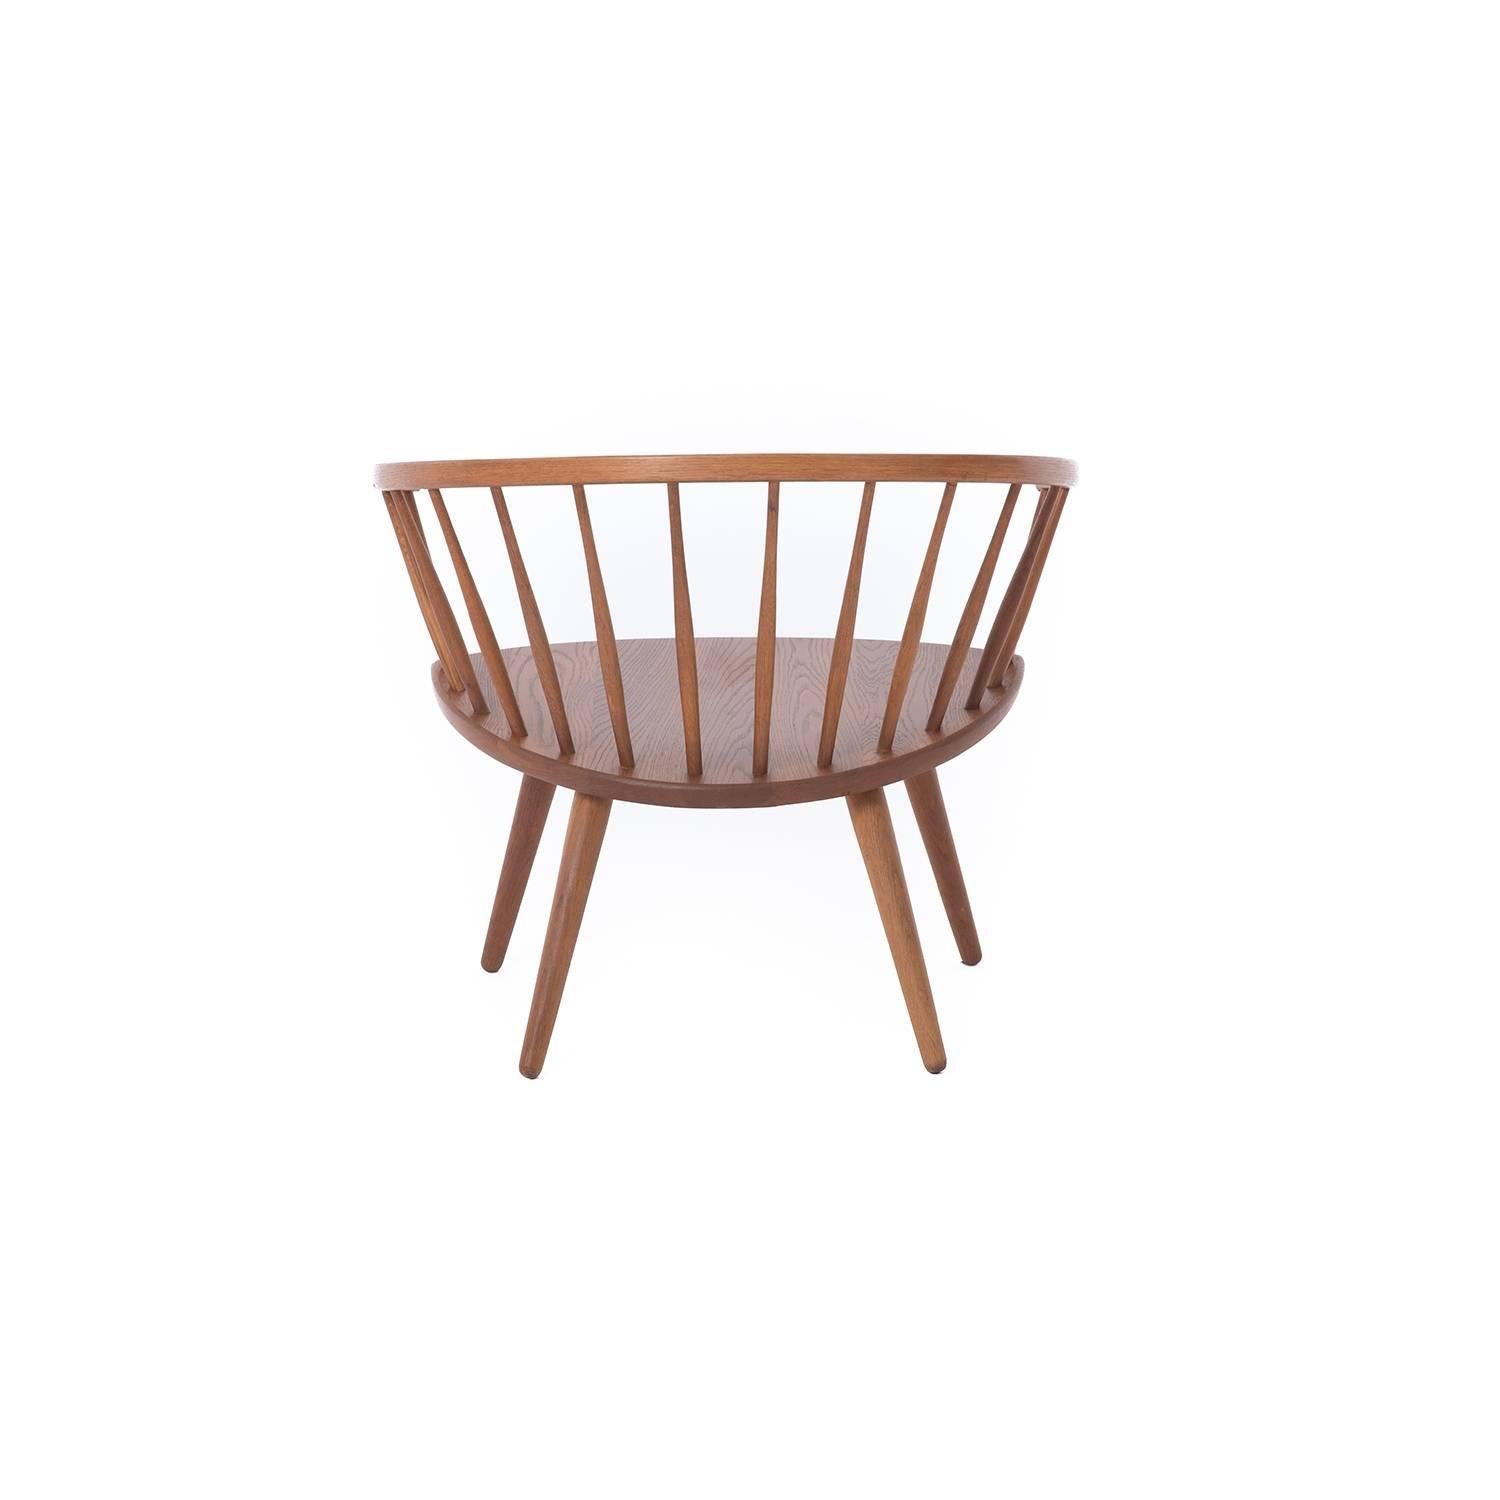 Stained Scandinavian Modern Spindle-Back Chair